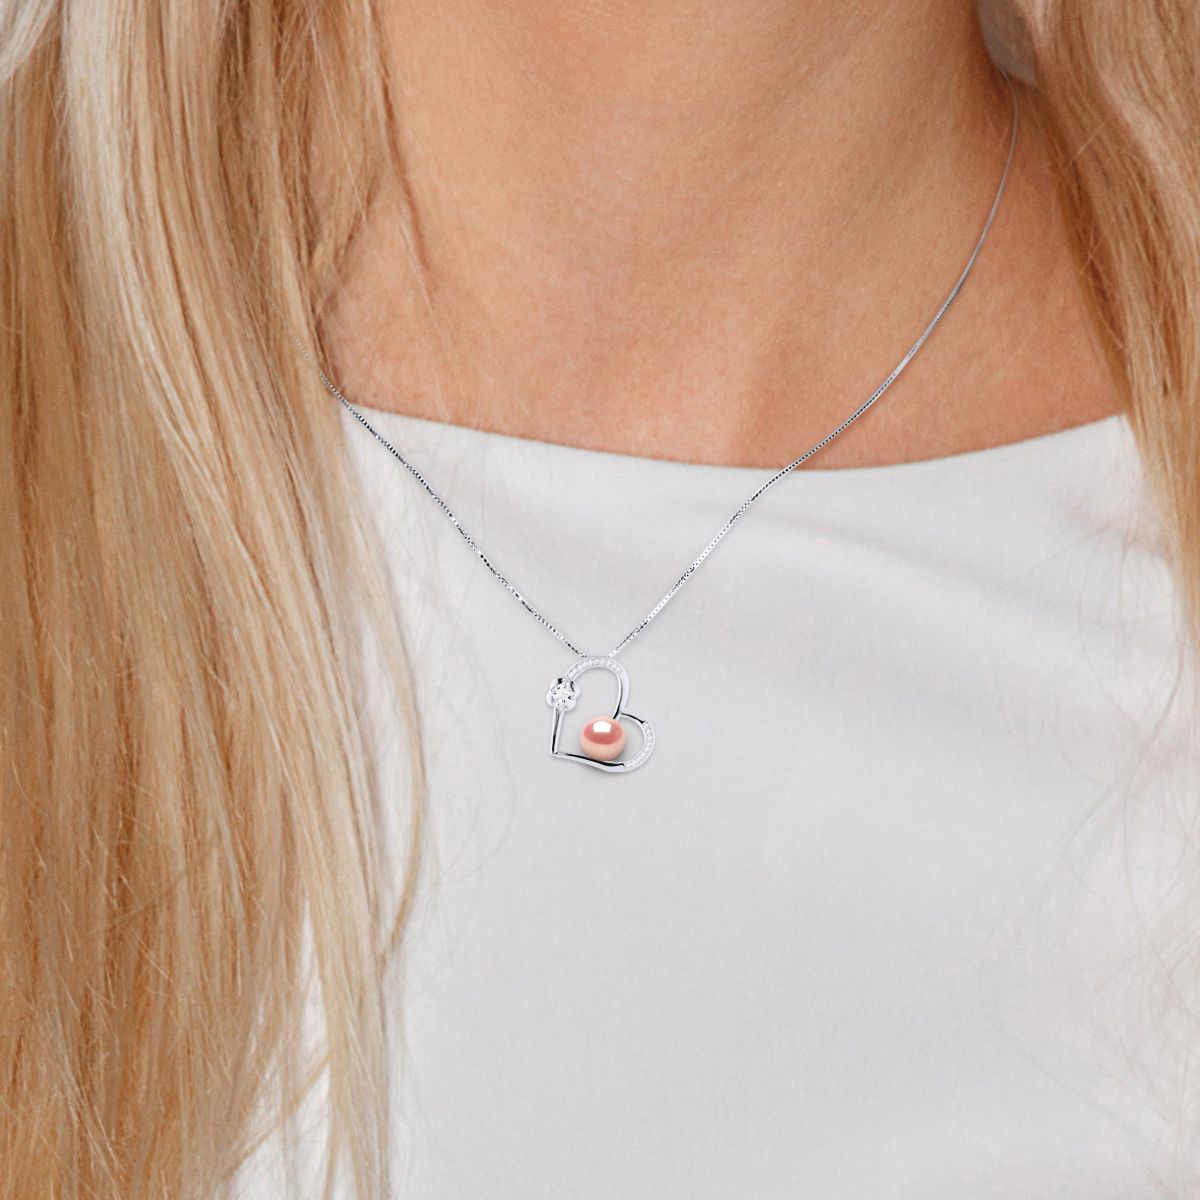 Necklace - Freshwater Pearl 8-9mm button - Heart Pattern & Oxides - Box Chain Rhodium 925 Thousandth - Length: 42 cm - Delivered in a case with a certificate of authenticity and an international Warranty - All our jewelry are manufactured in France.